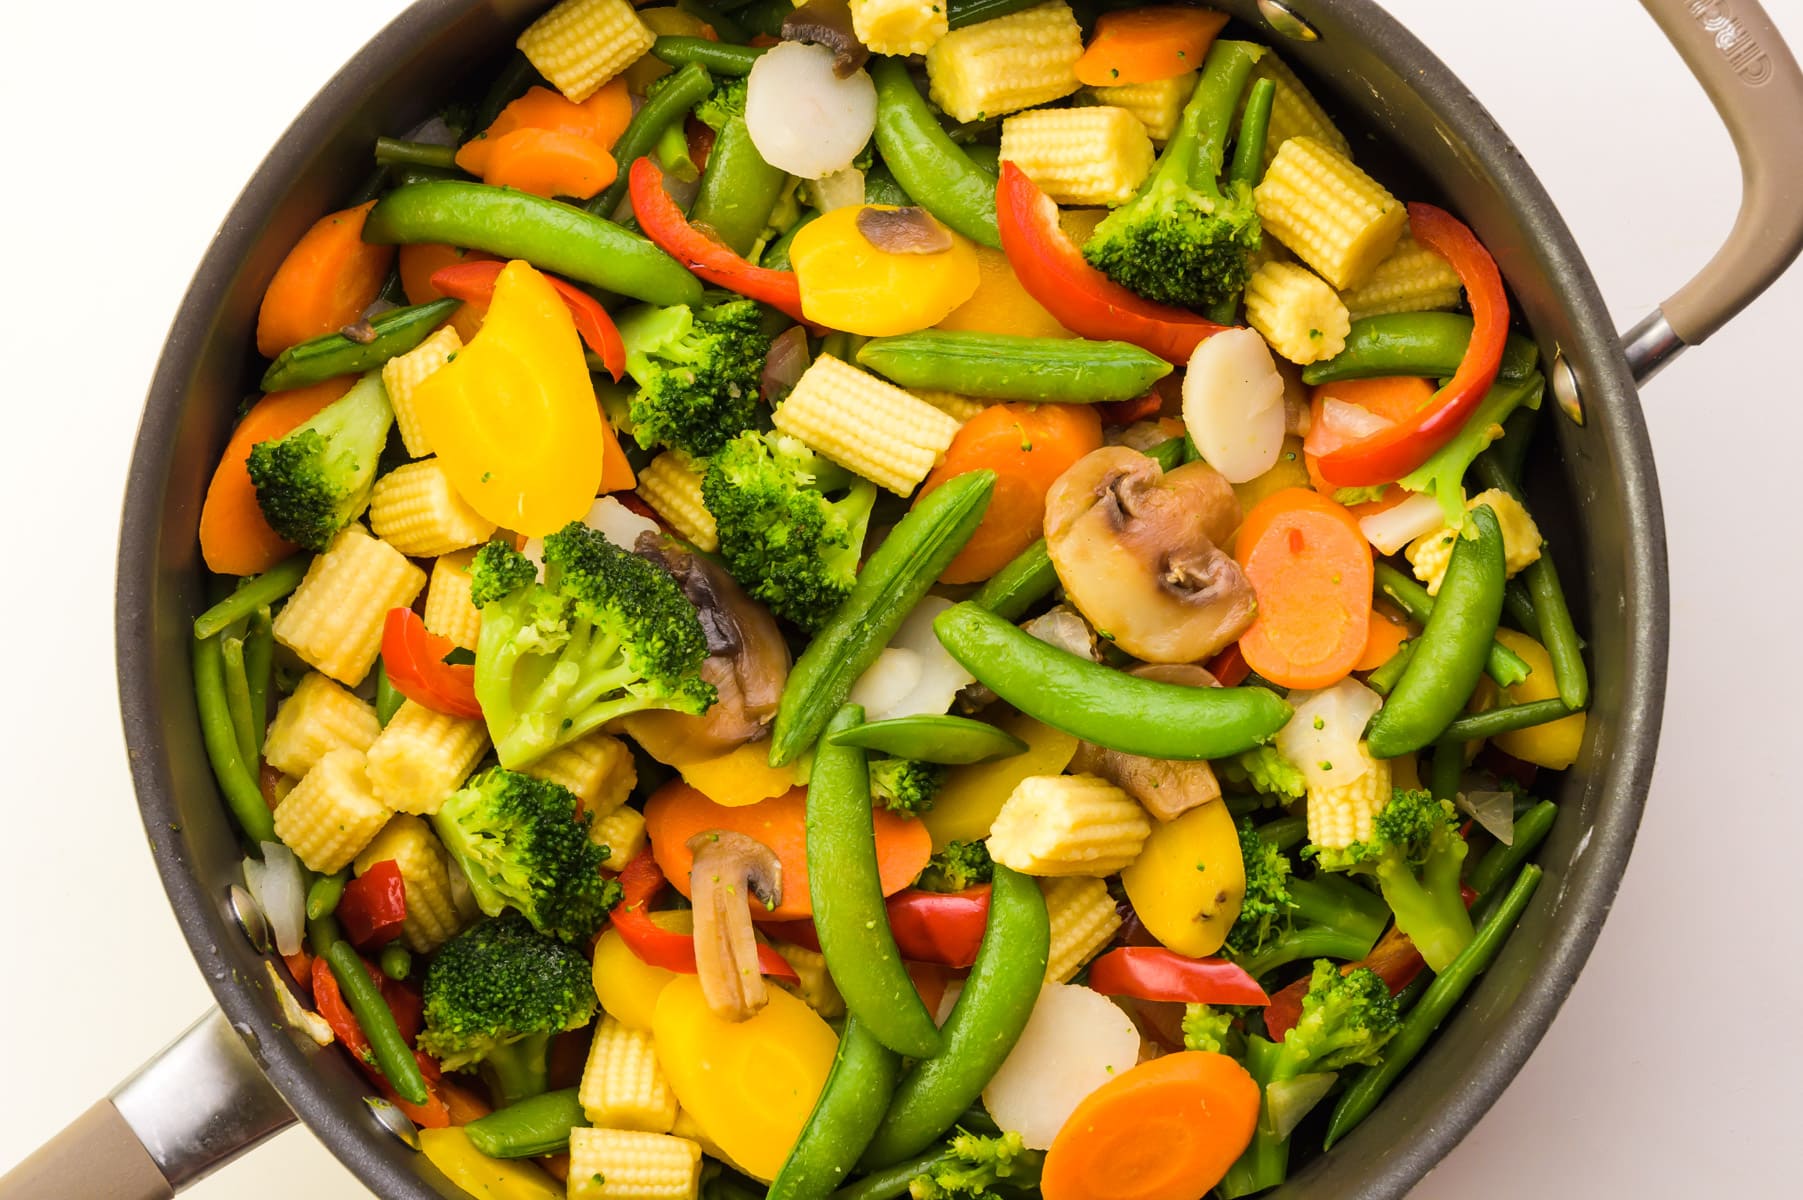 Looking down on a skillet full of veggies, such as green beans, broccoli, carrots, and more.